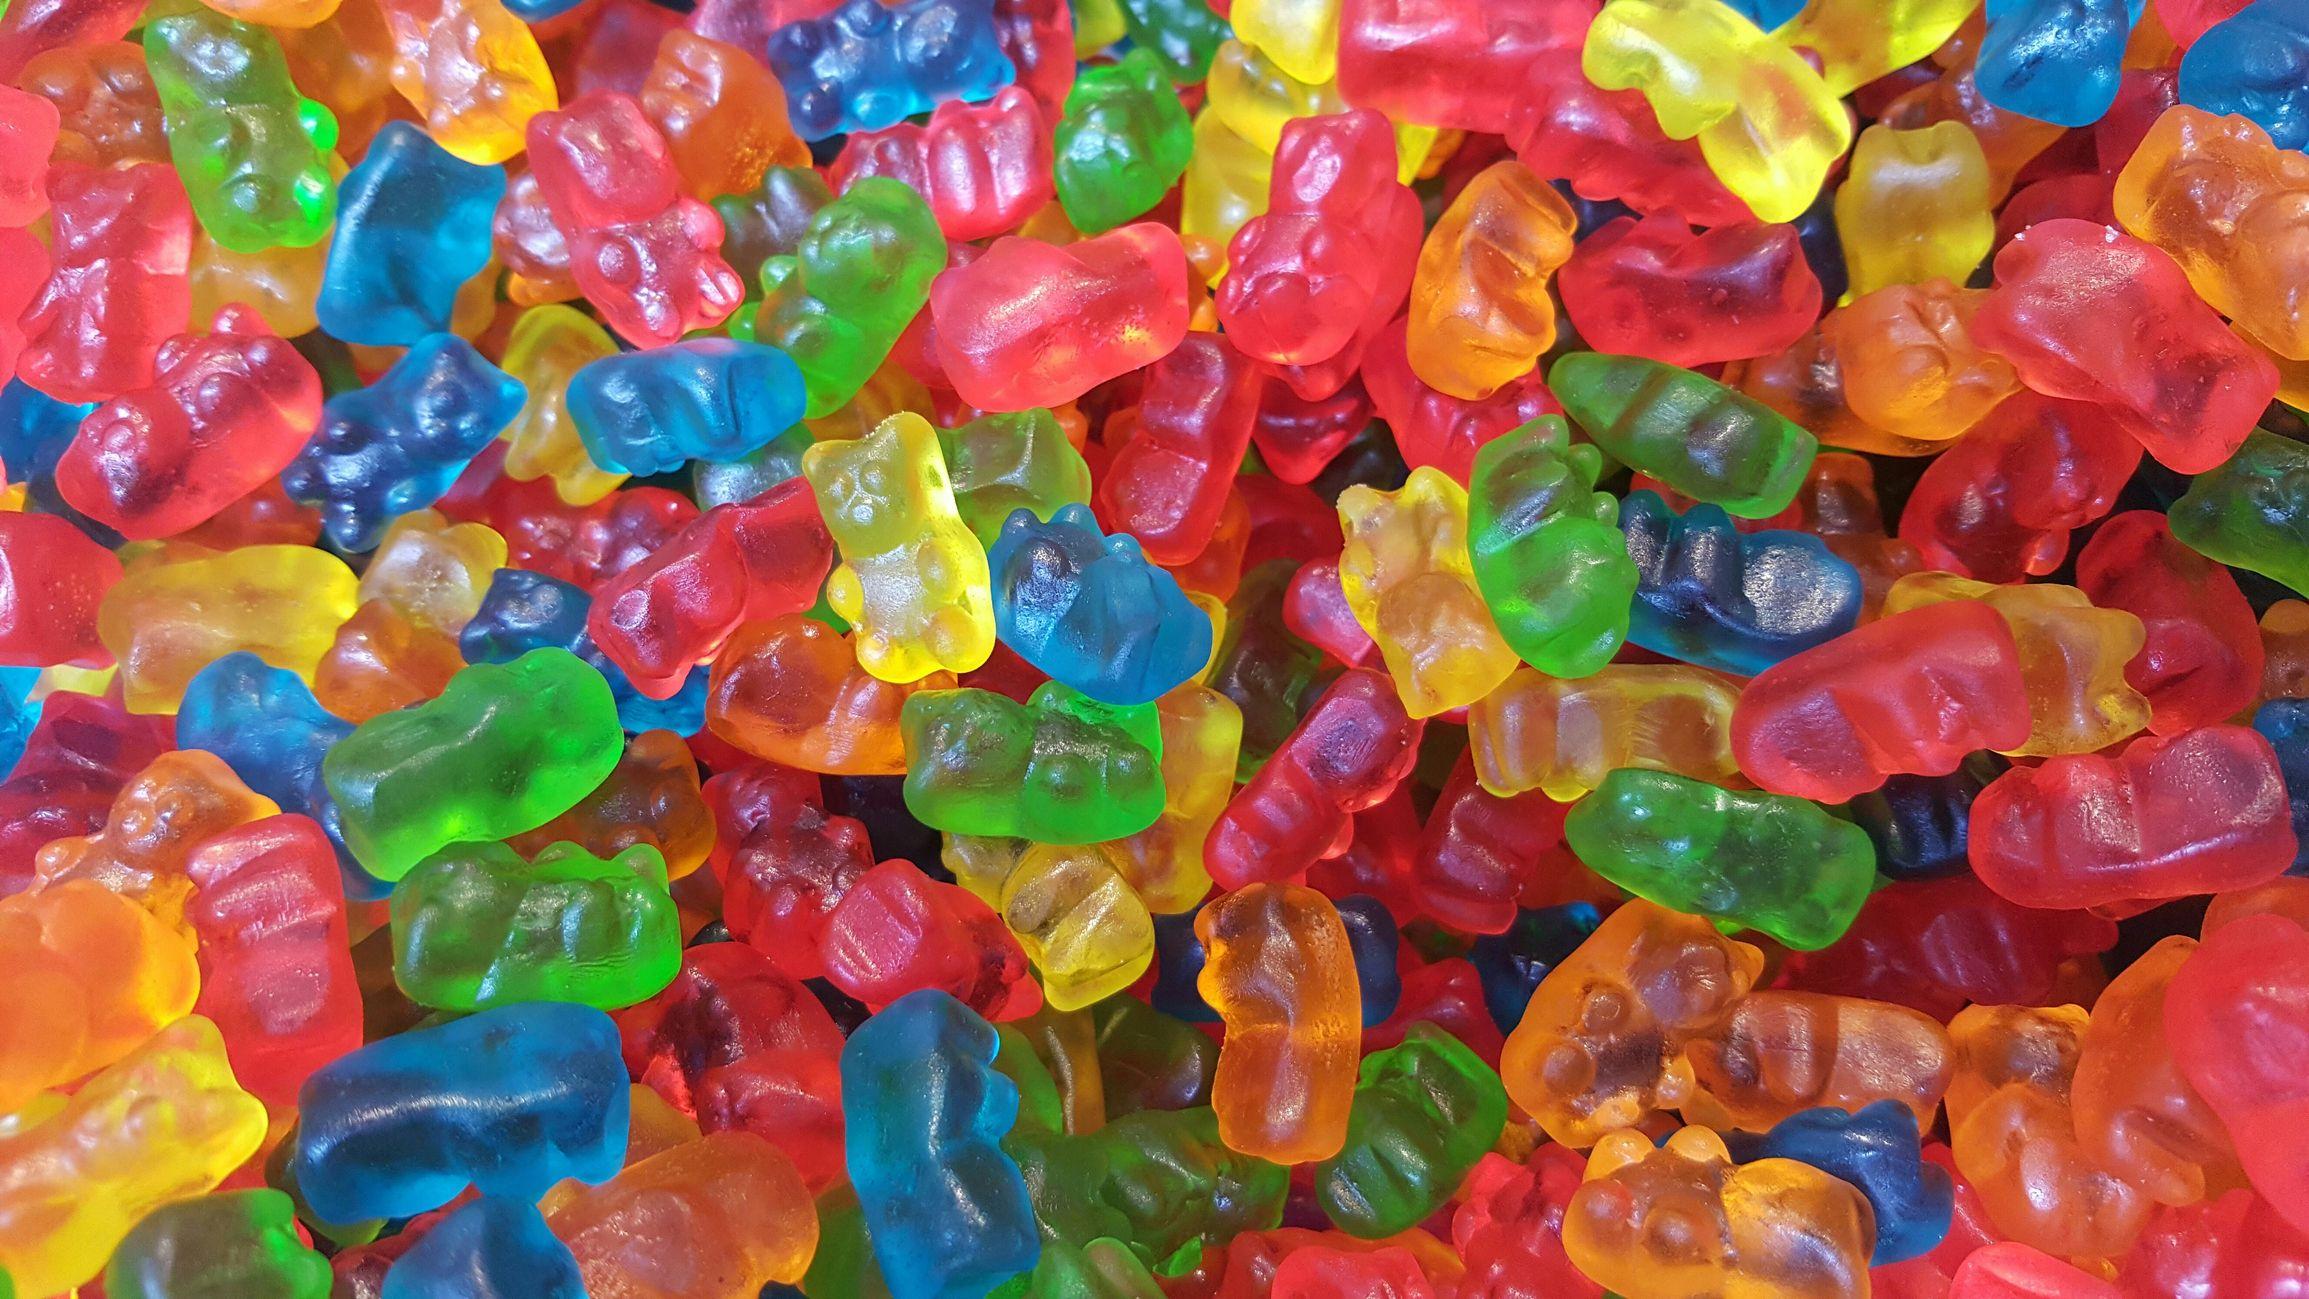 Things You Should Know Before Eating Gummy Bears